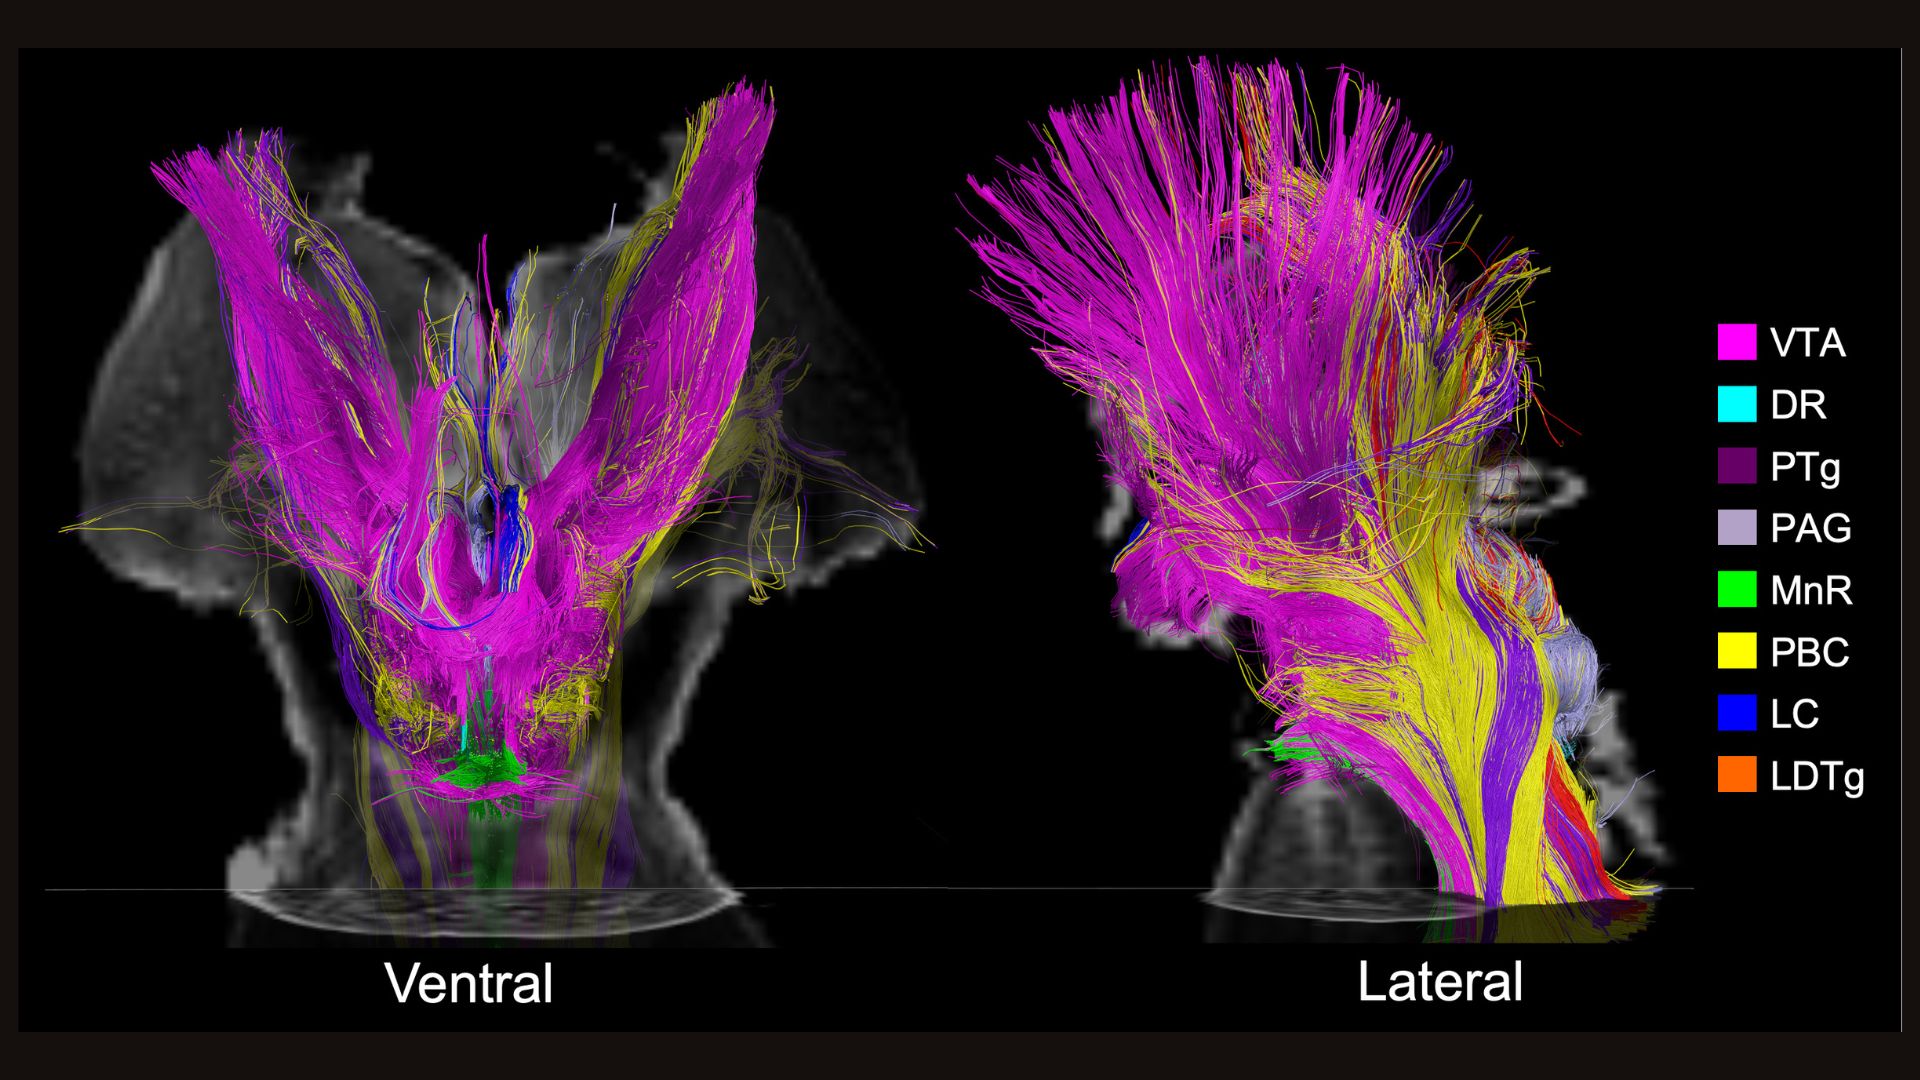 Two side-by-side mri scans showing a human brain stem at two angles with colorful neuron tracts highlighted in various colors